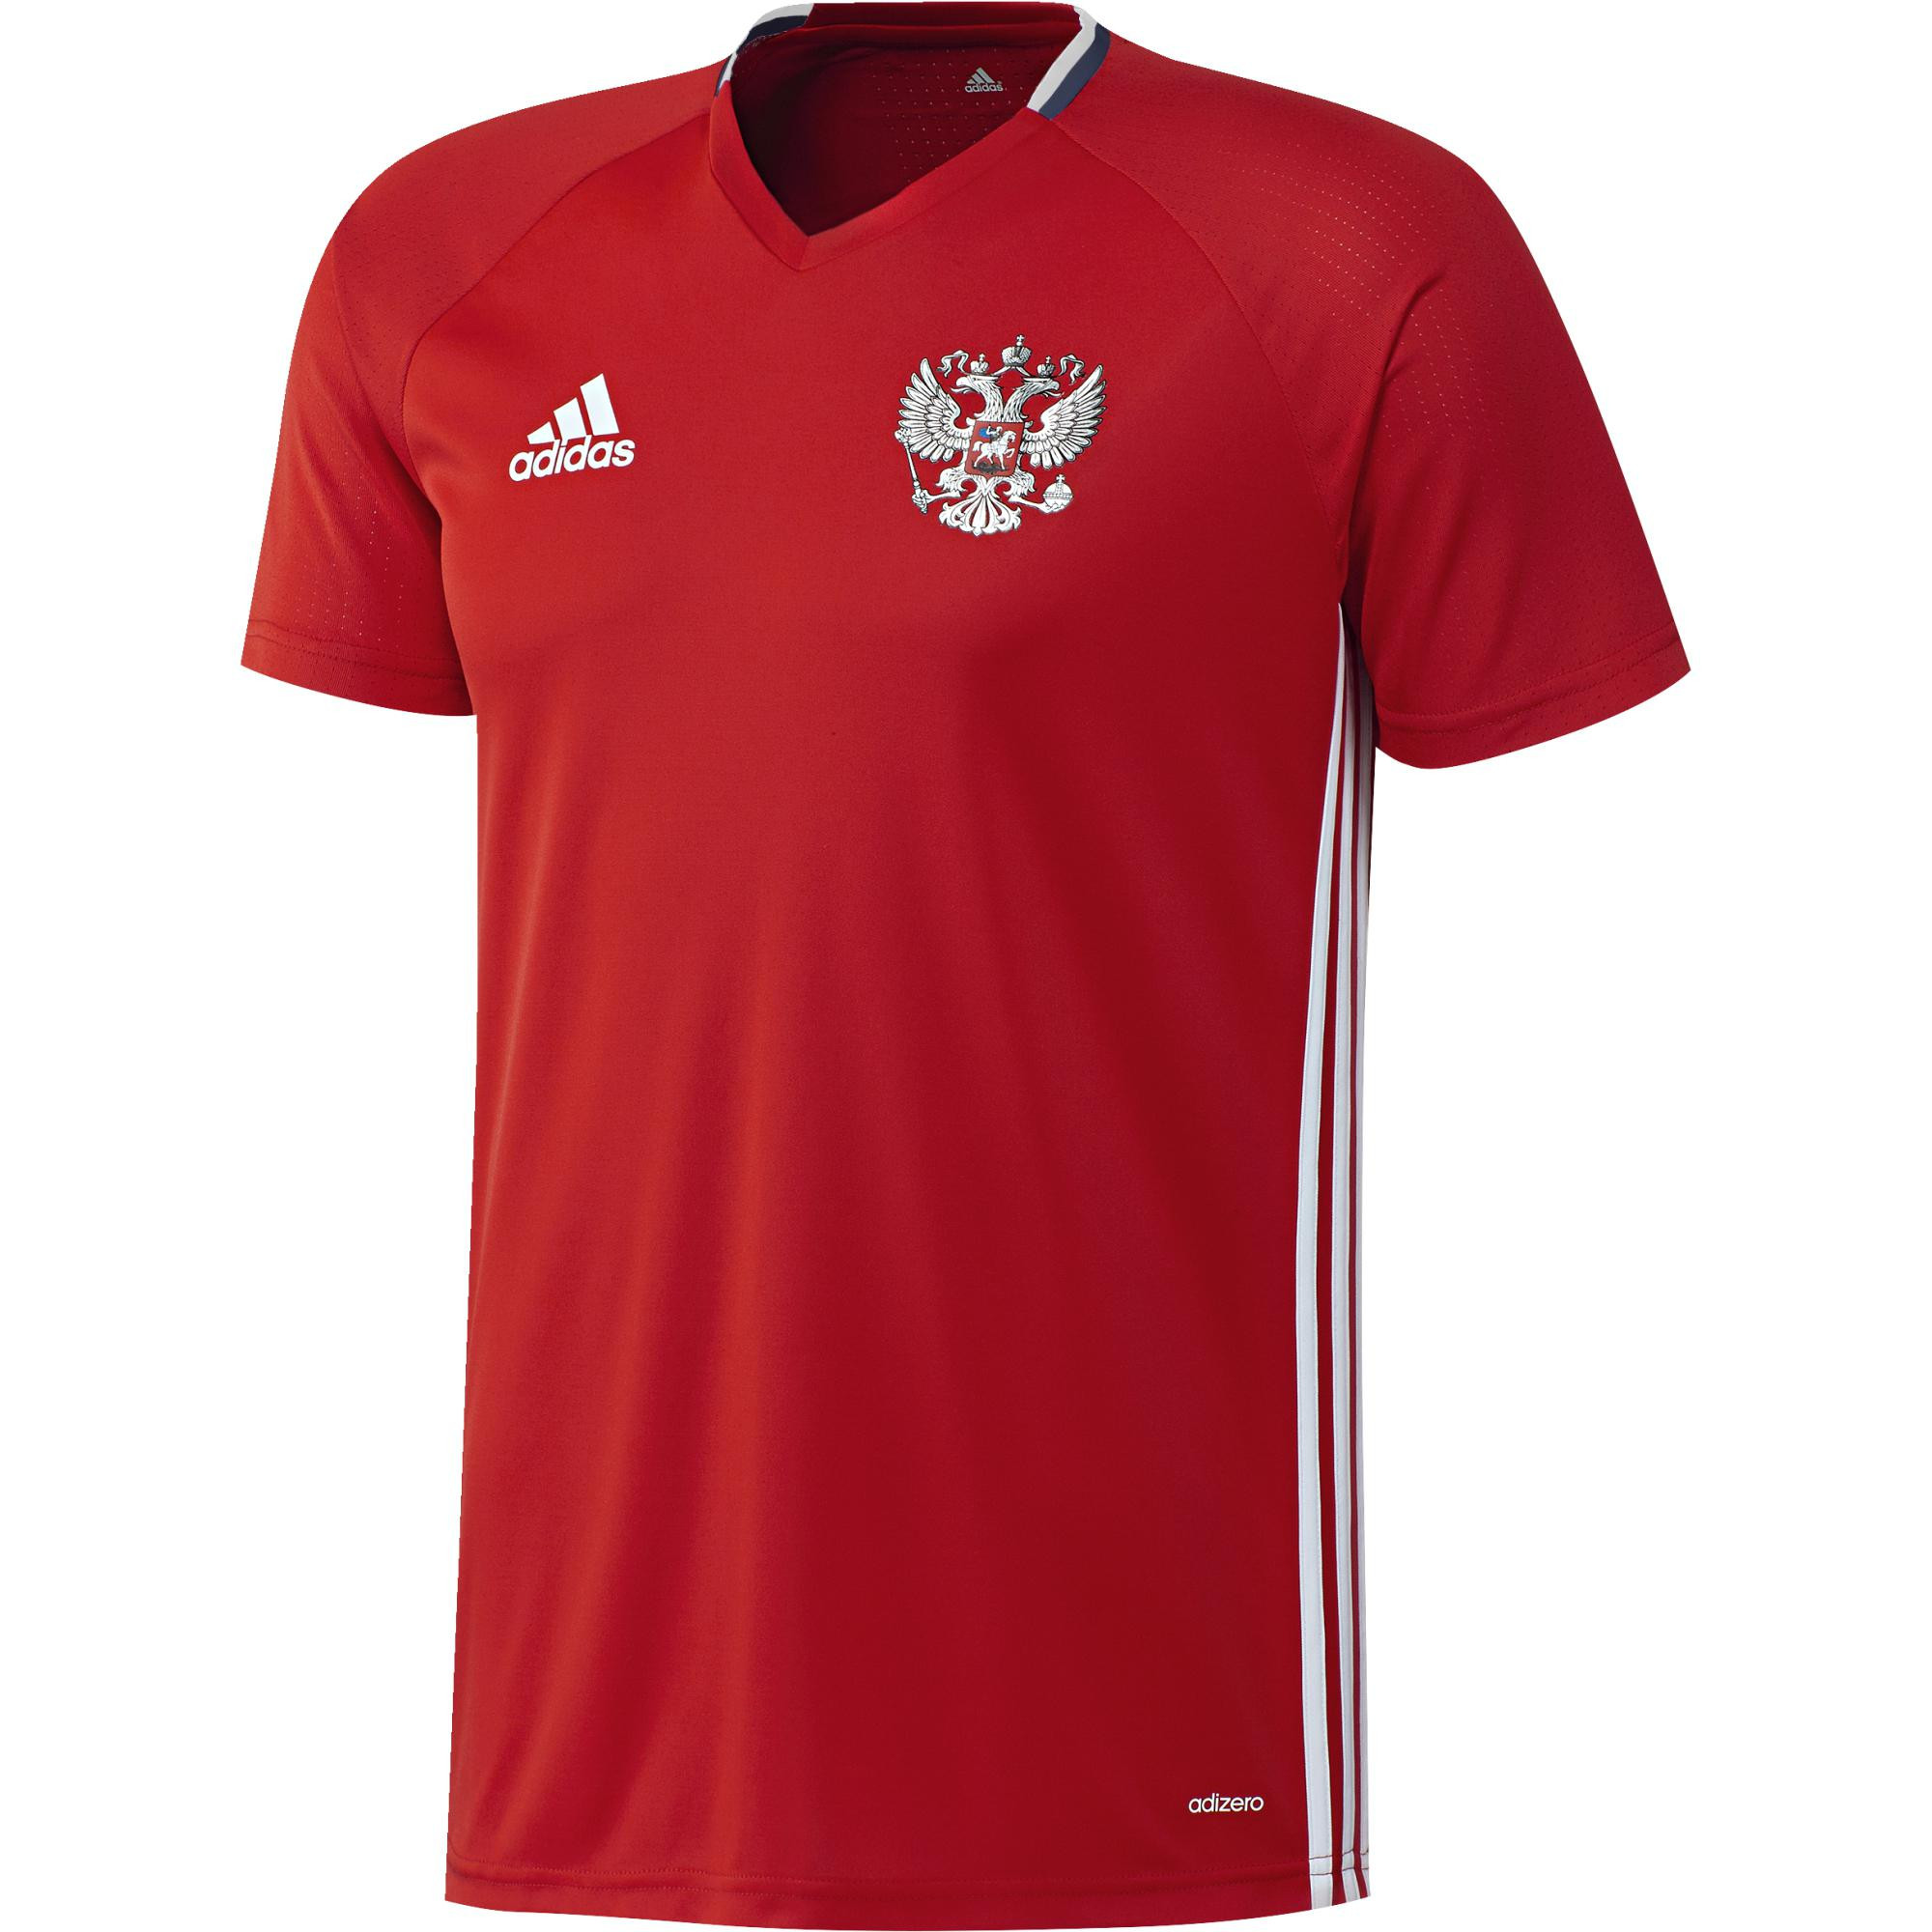 ADIDAS RUSSIE MAILLOT ENTRAINEMENT ROUGE 2016